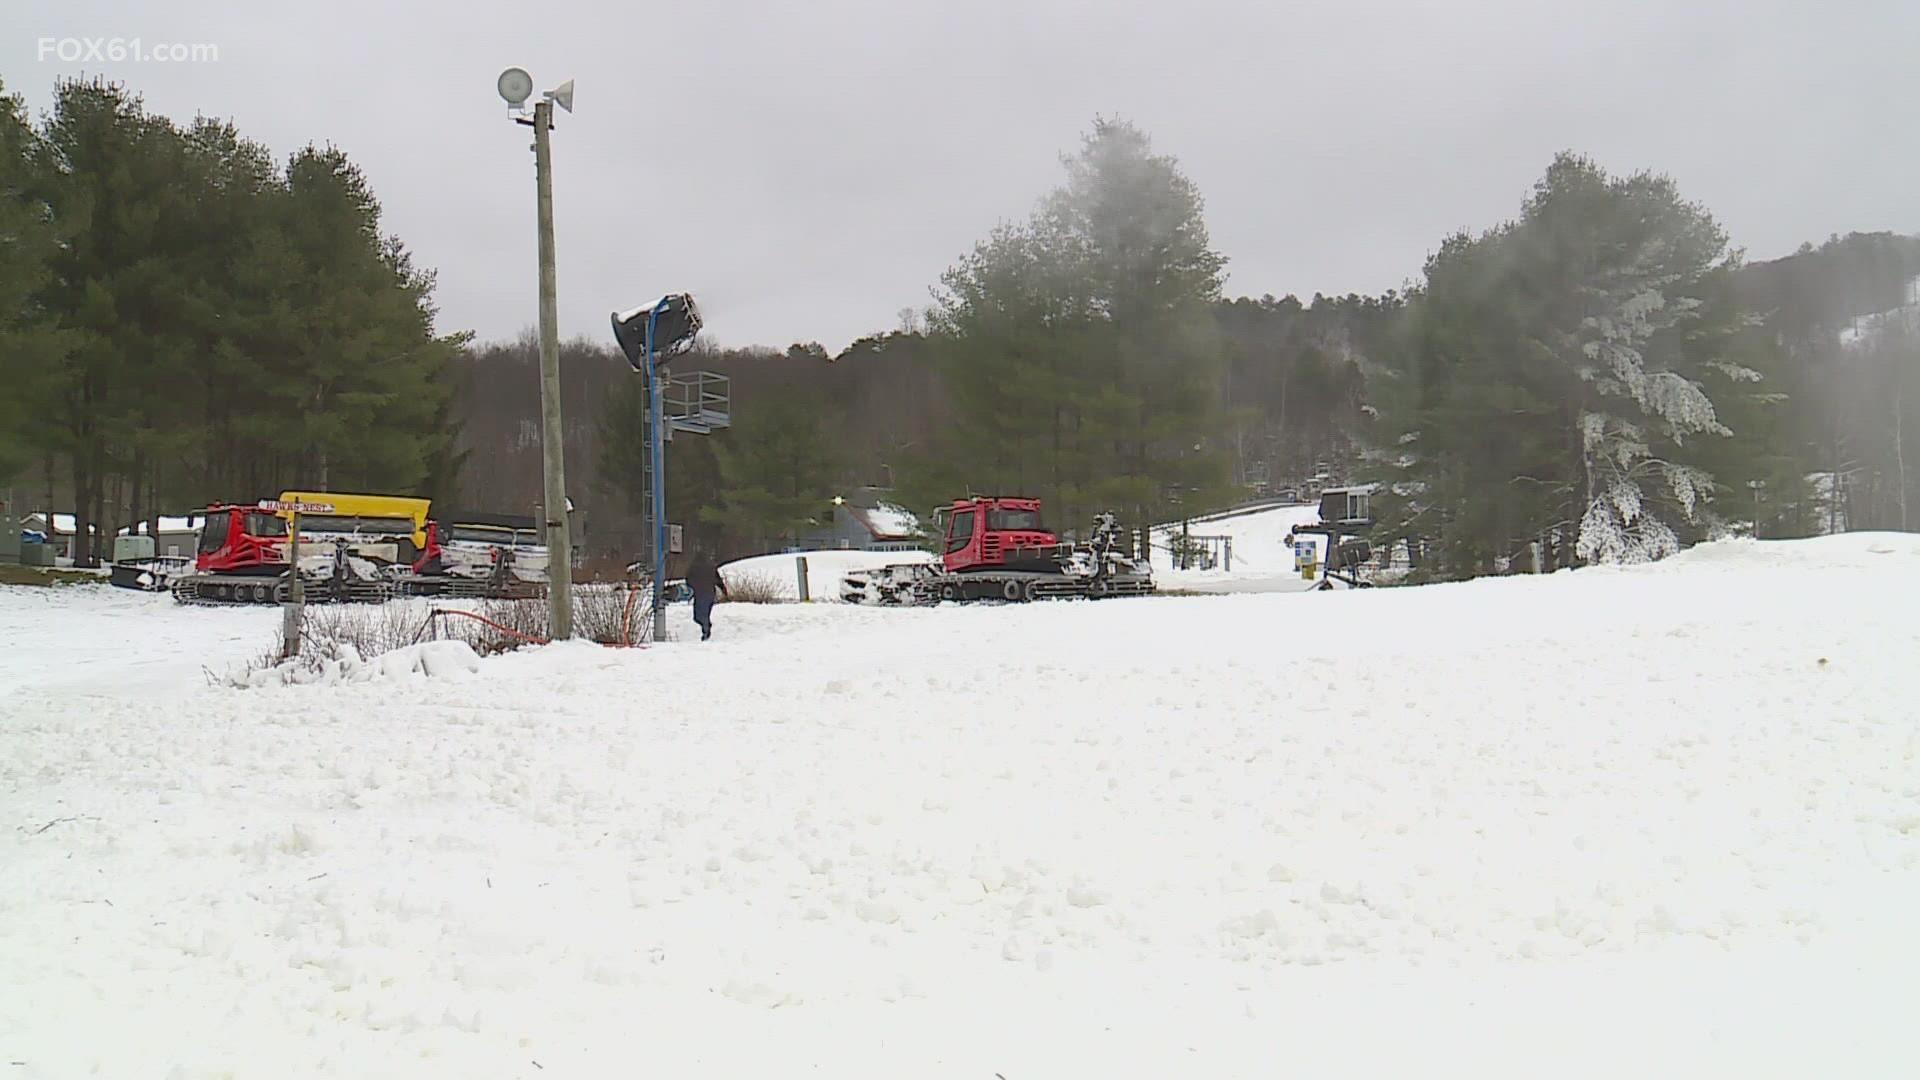 A winter weather system that is moving into Connecticut is creating high hopes for ski enthusiasts at the higher elevations in the state’s northwest corner.